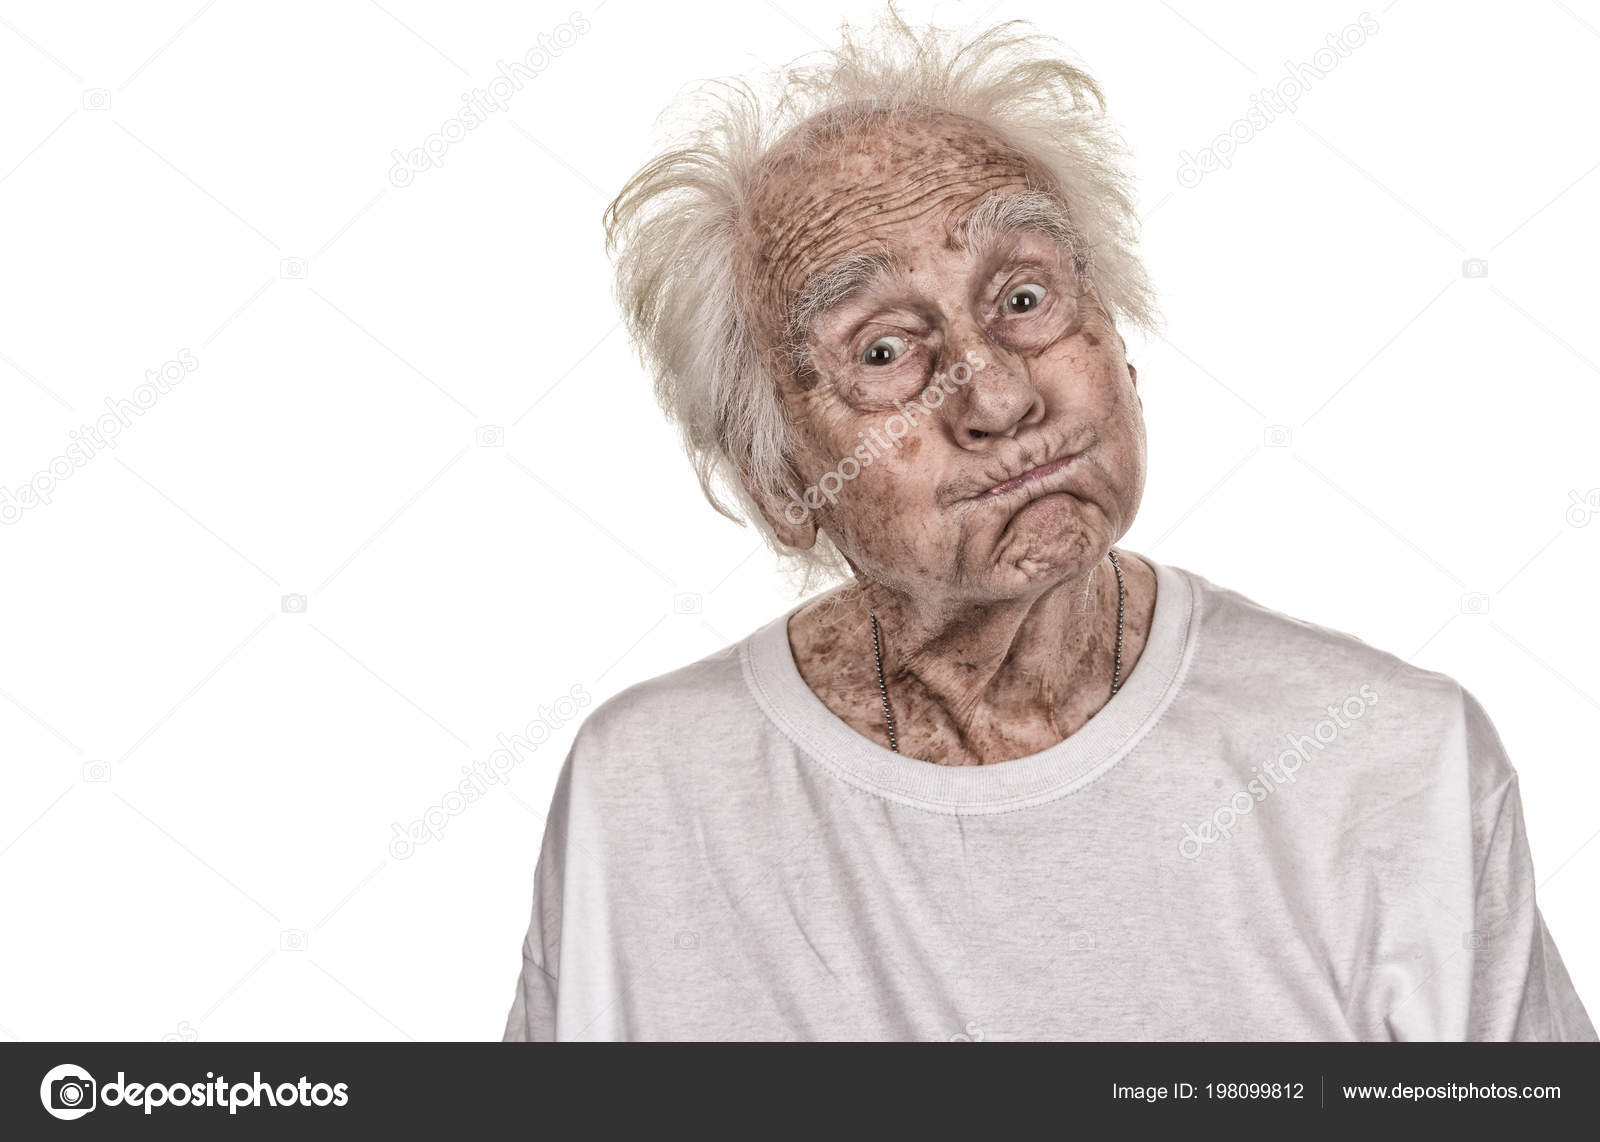 Very Funny Old Senior Man Makes Funny Faces Stock Photo by ©rinderart  198099812